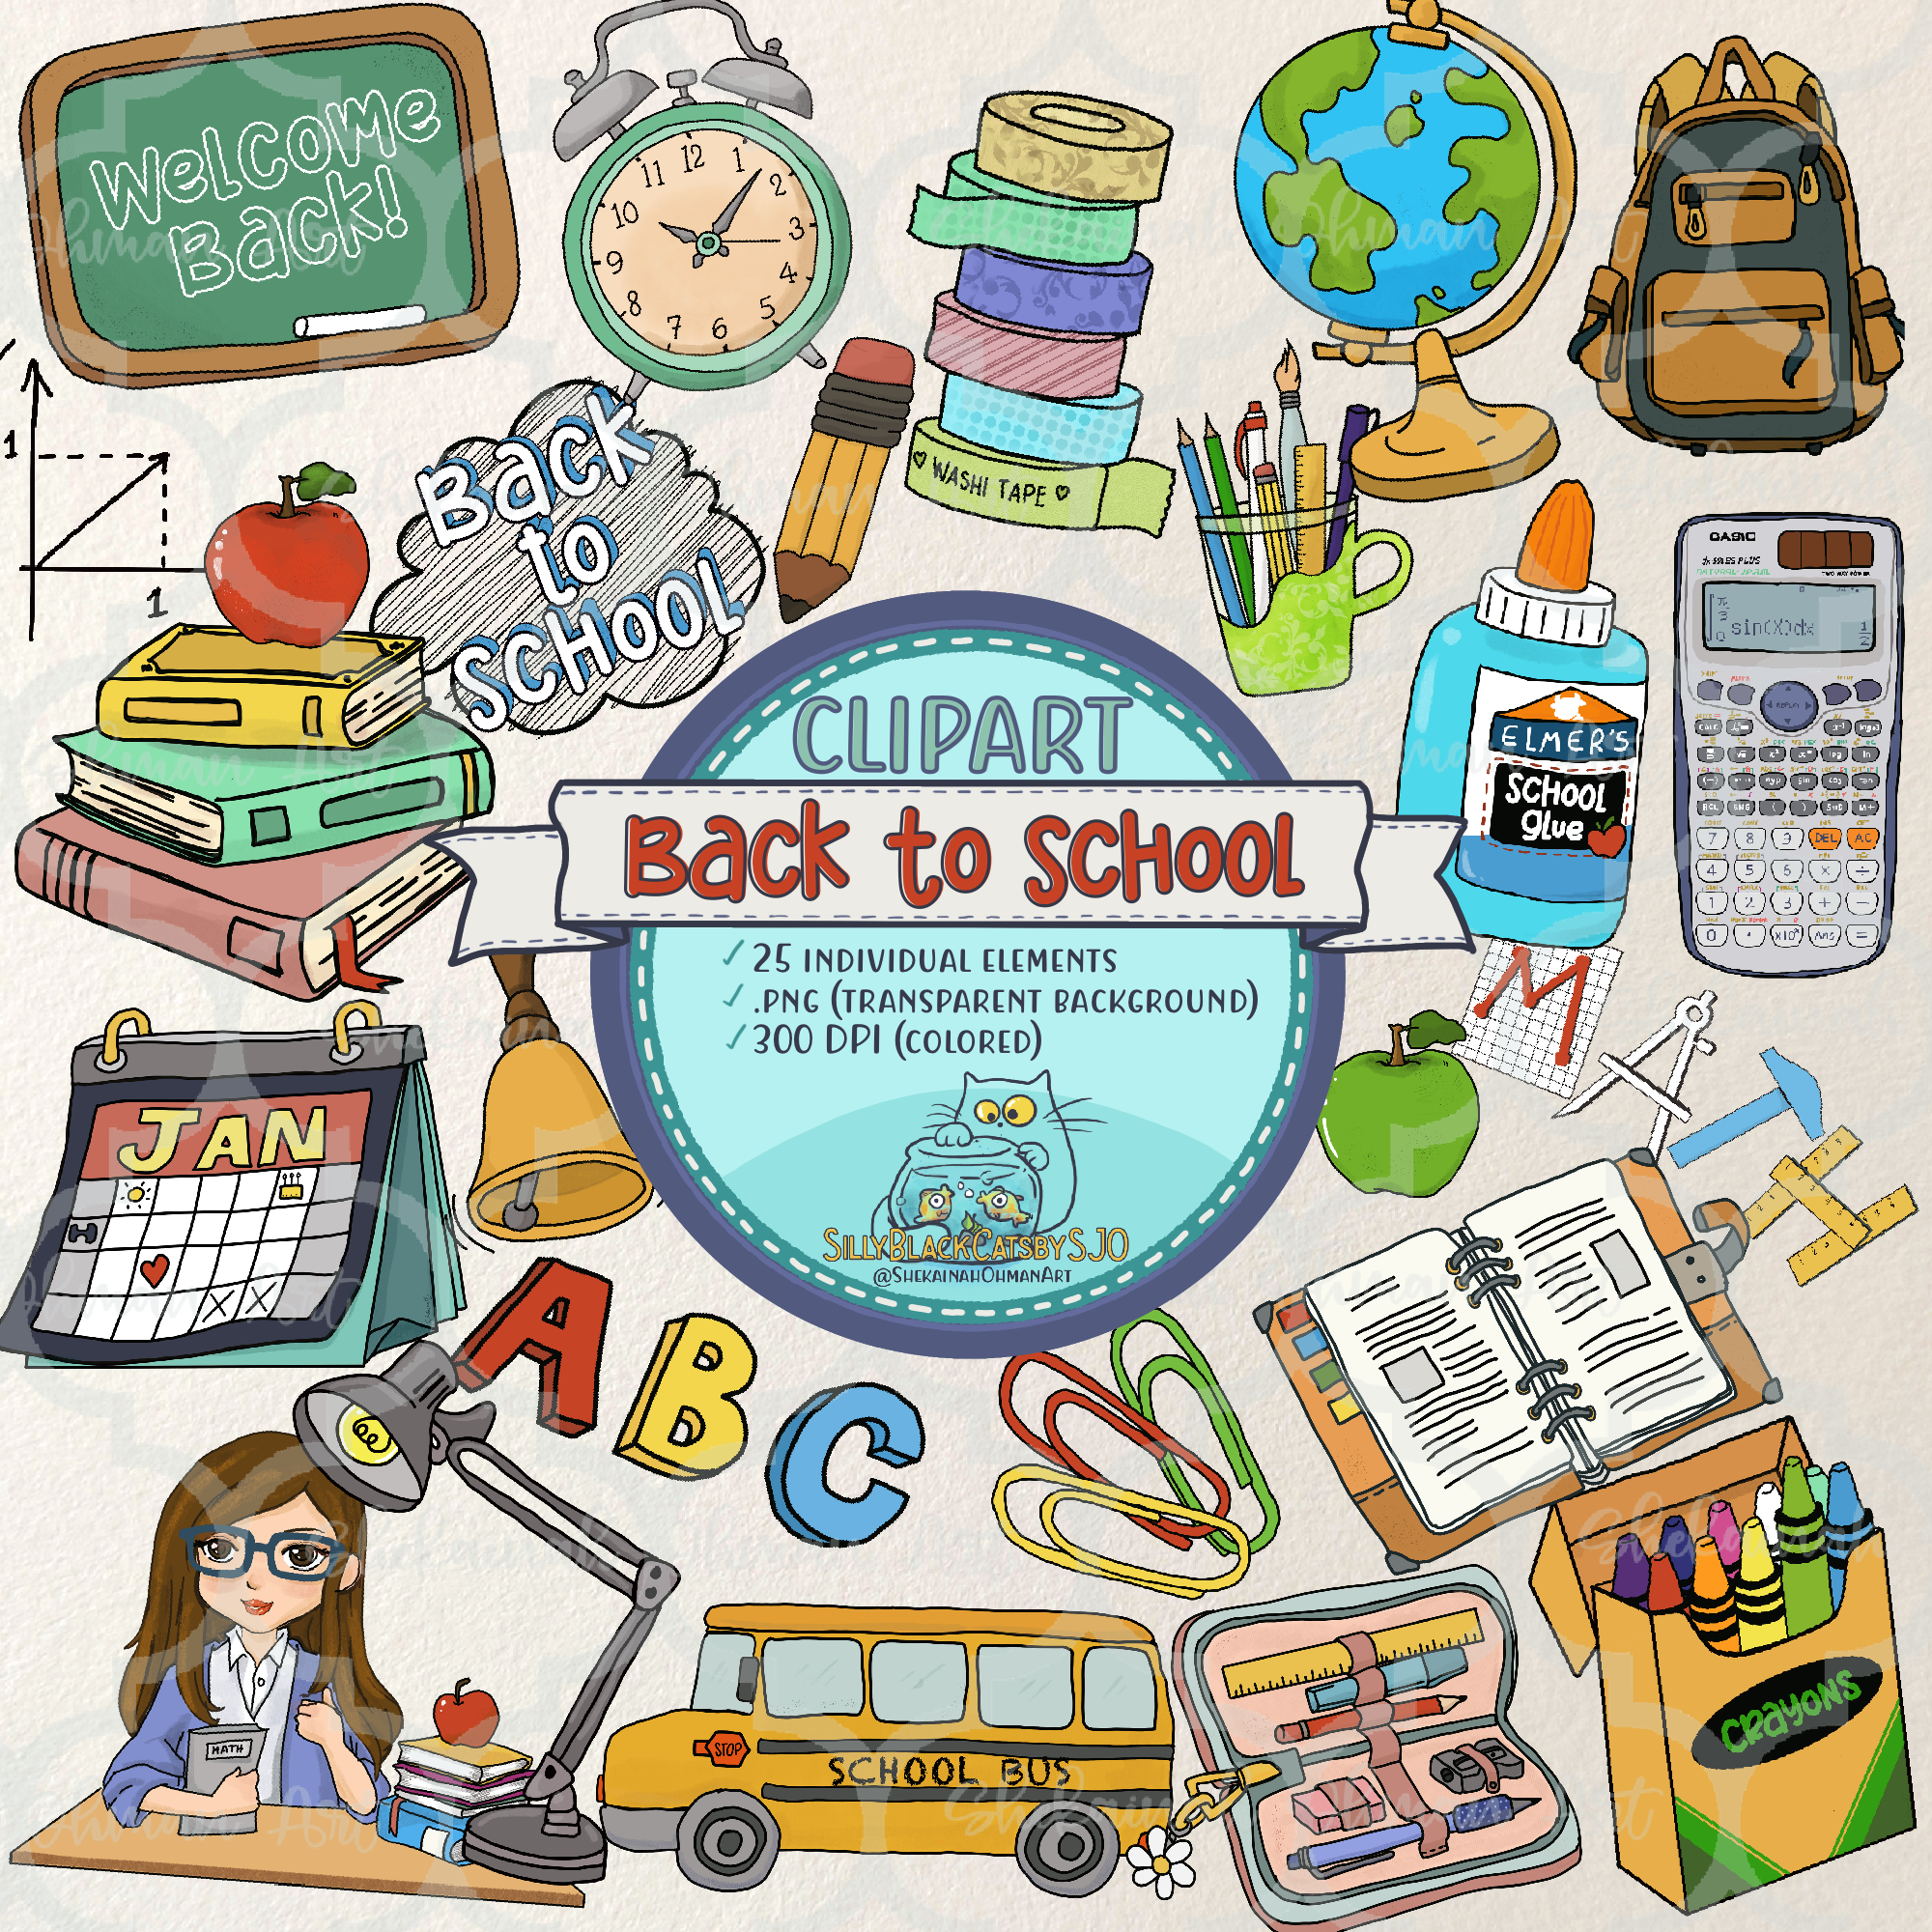 C-Back to school clipart bundle (COLORED) | School cliparts, stationary, png, bag, globe, calculator, clock, pen, books, bus's featured image